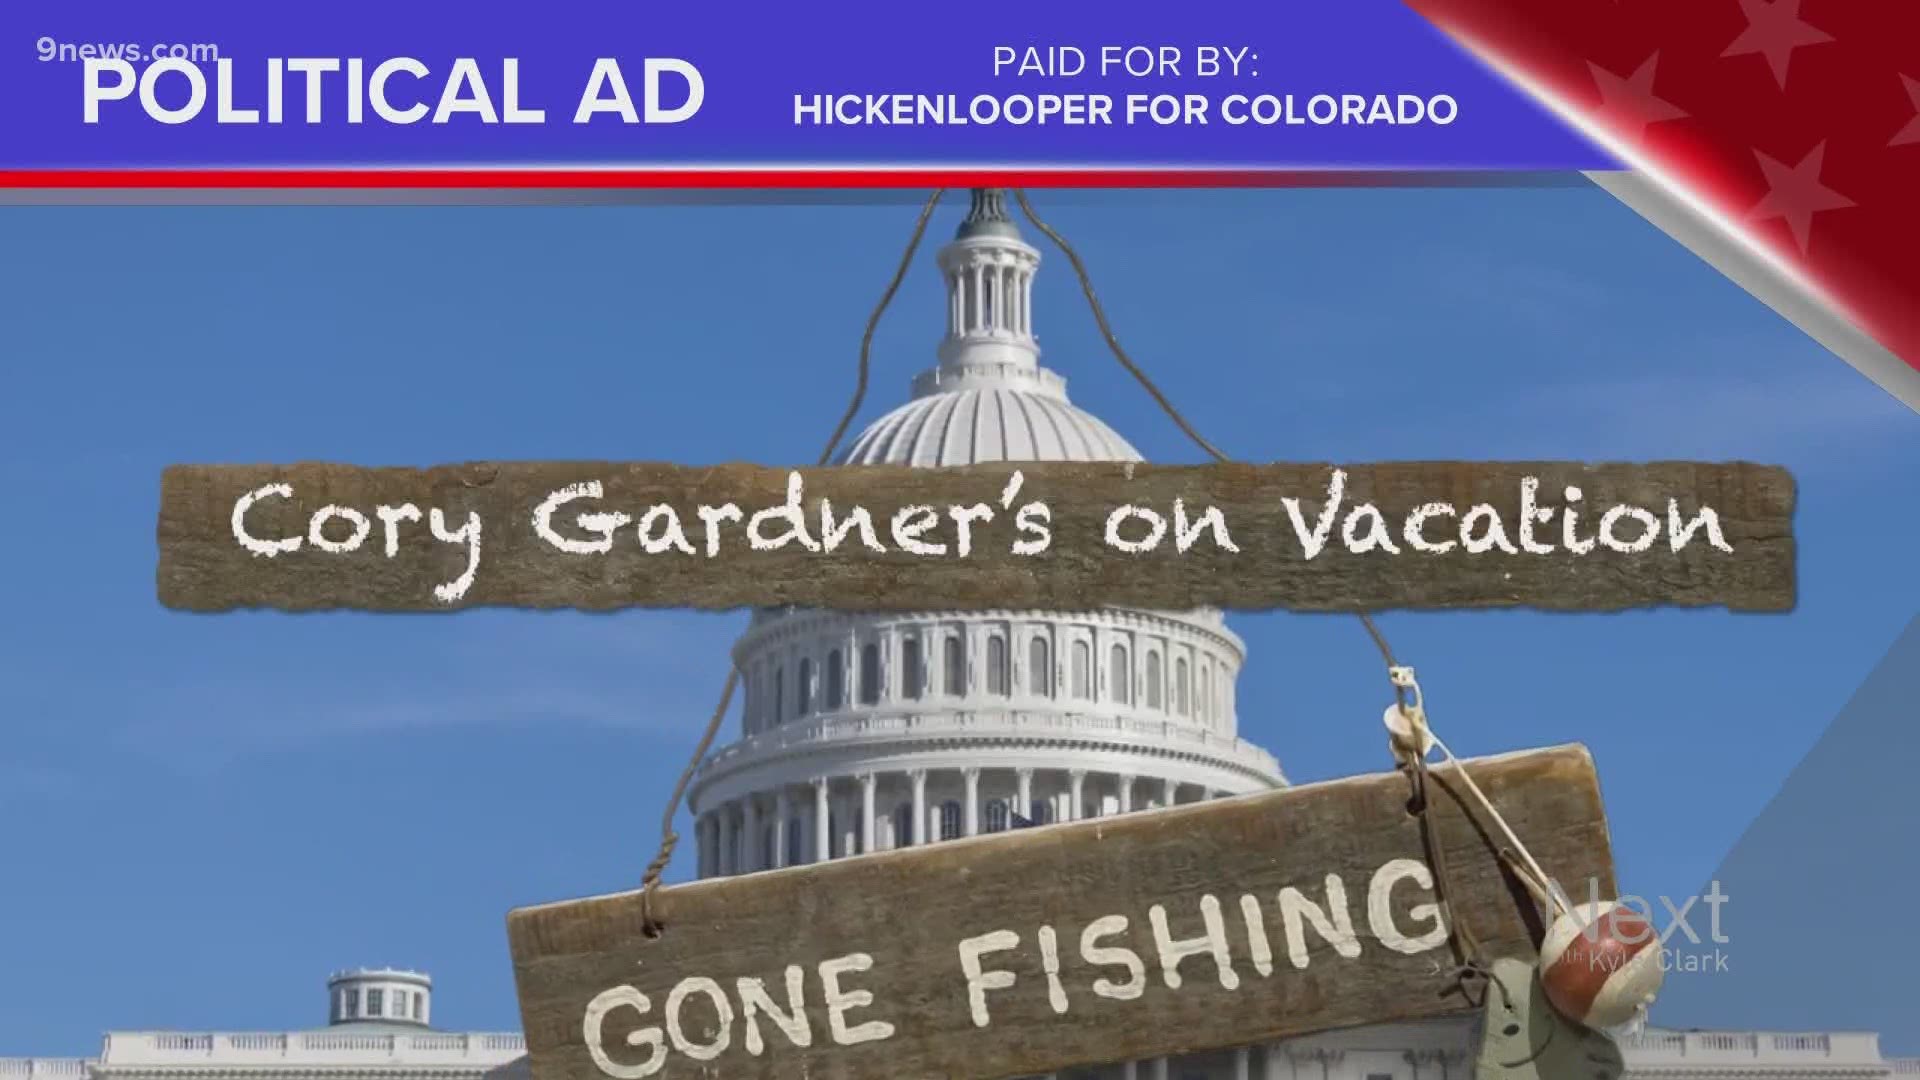 He's campaigned on not being a negative campaigner, yet Democrat John Hickenlooper paid for what appears to be his first negative ad against Republican Cory Gardner.